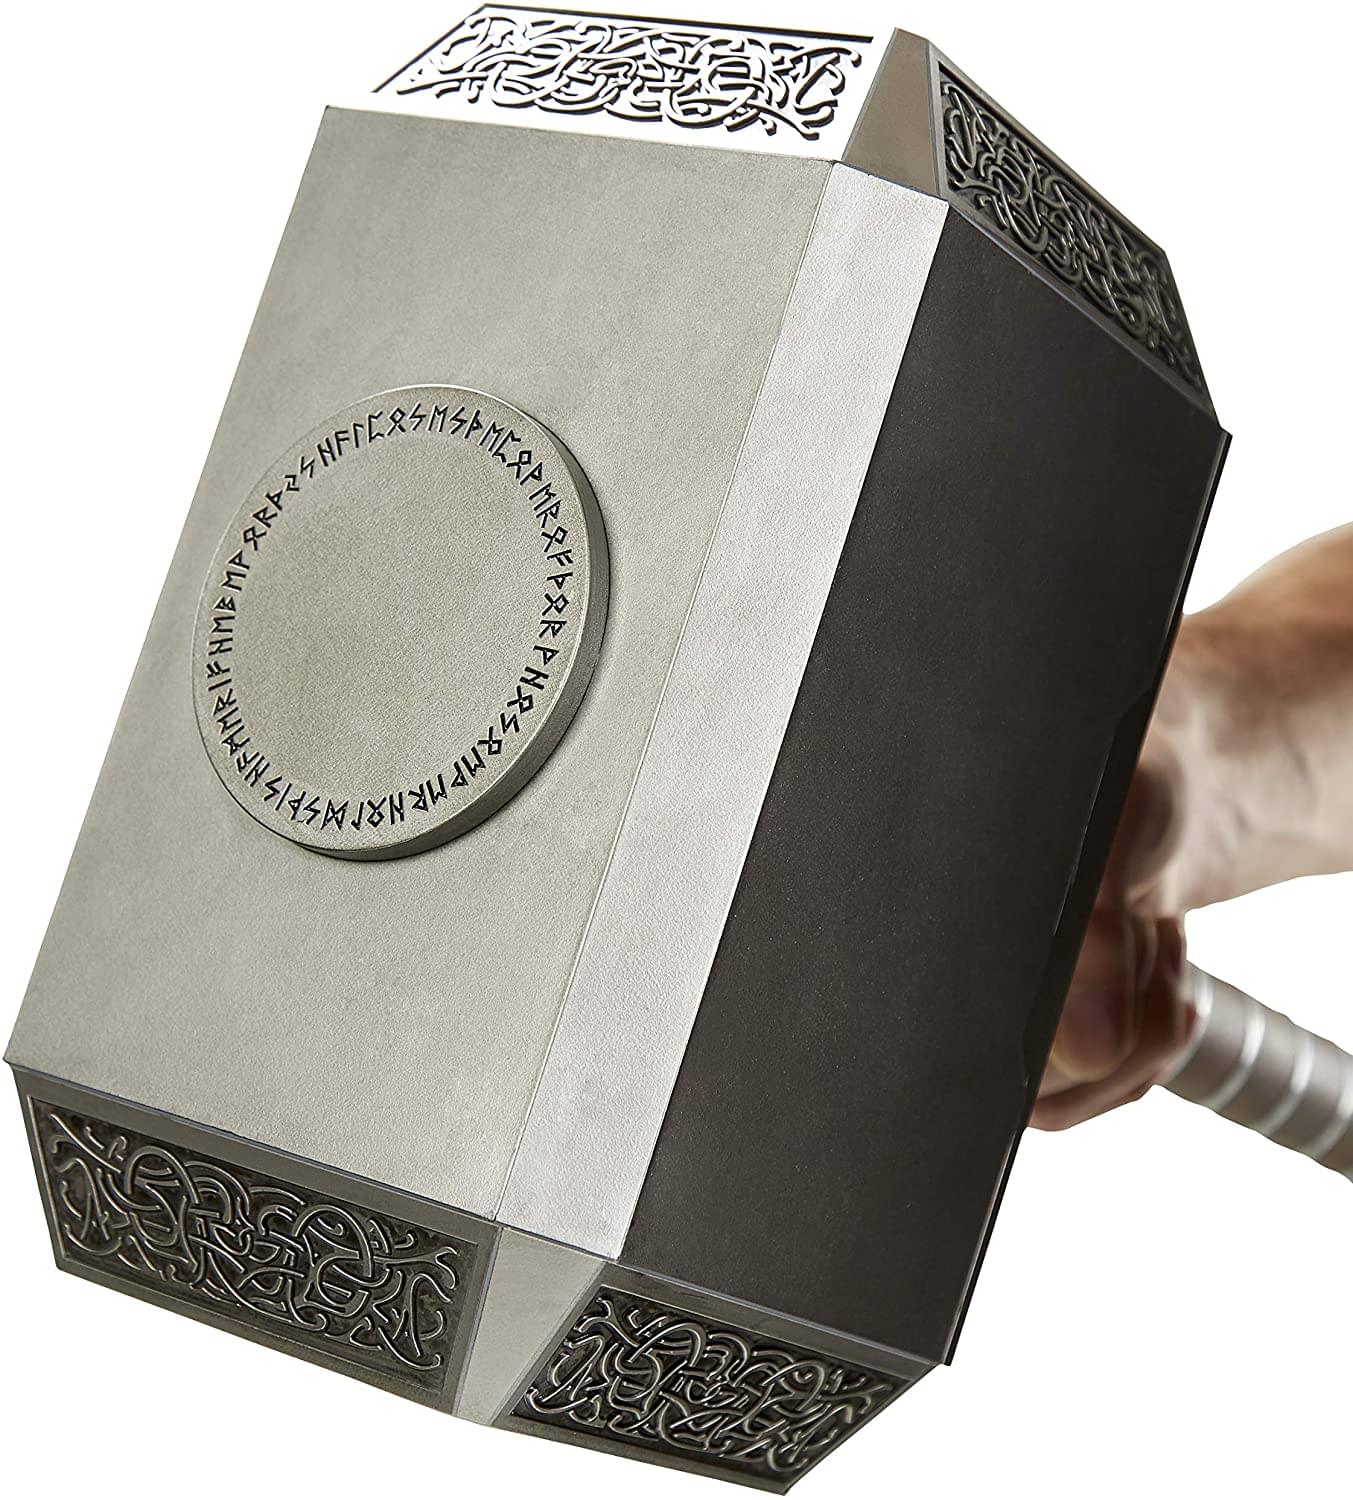 Marvel Legends Thor Mjolnir Electronic Hammer Role Play Replica